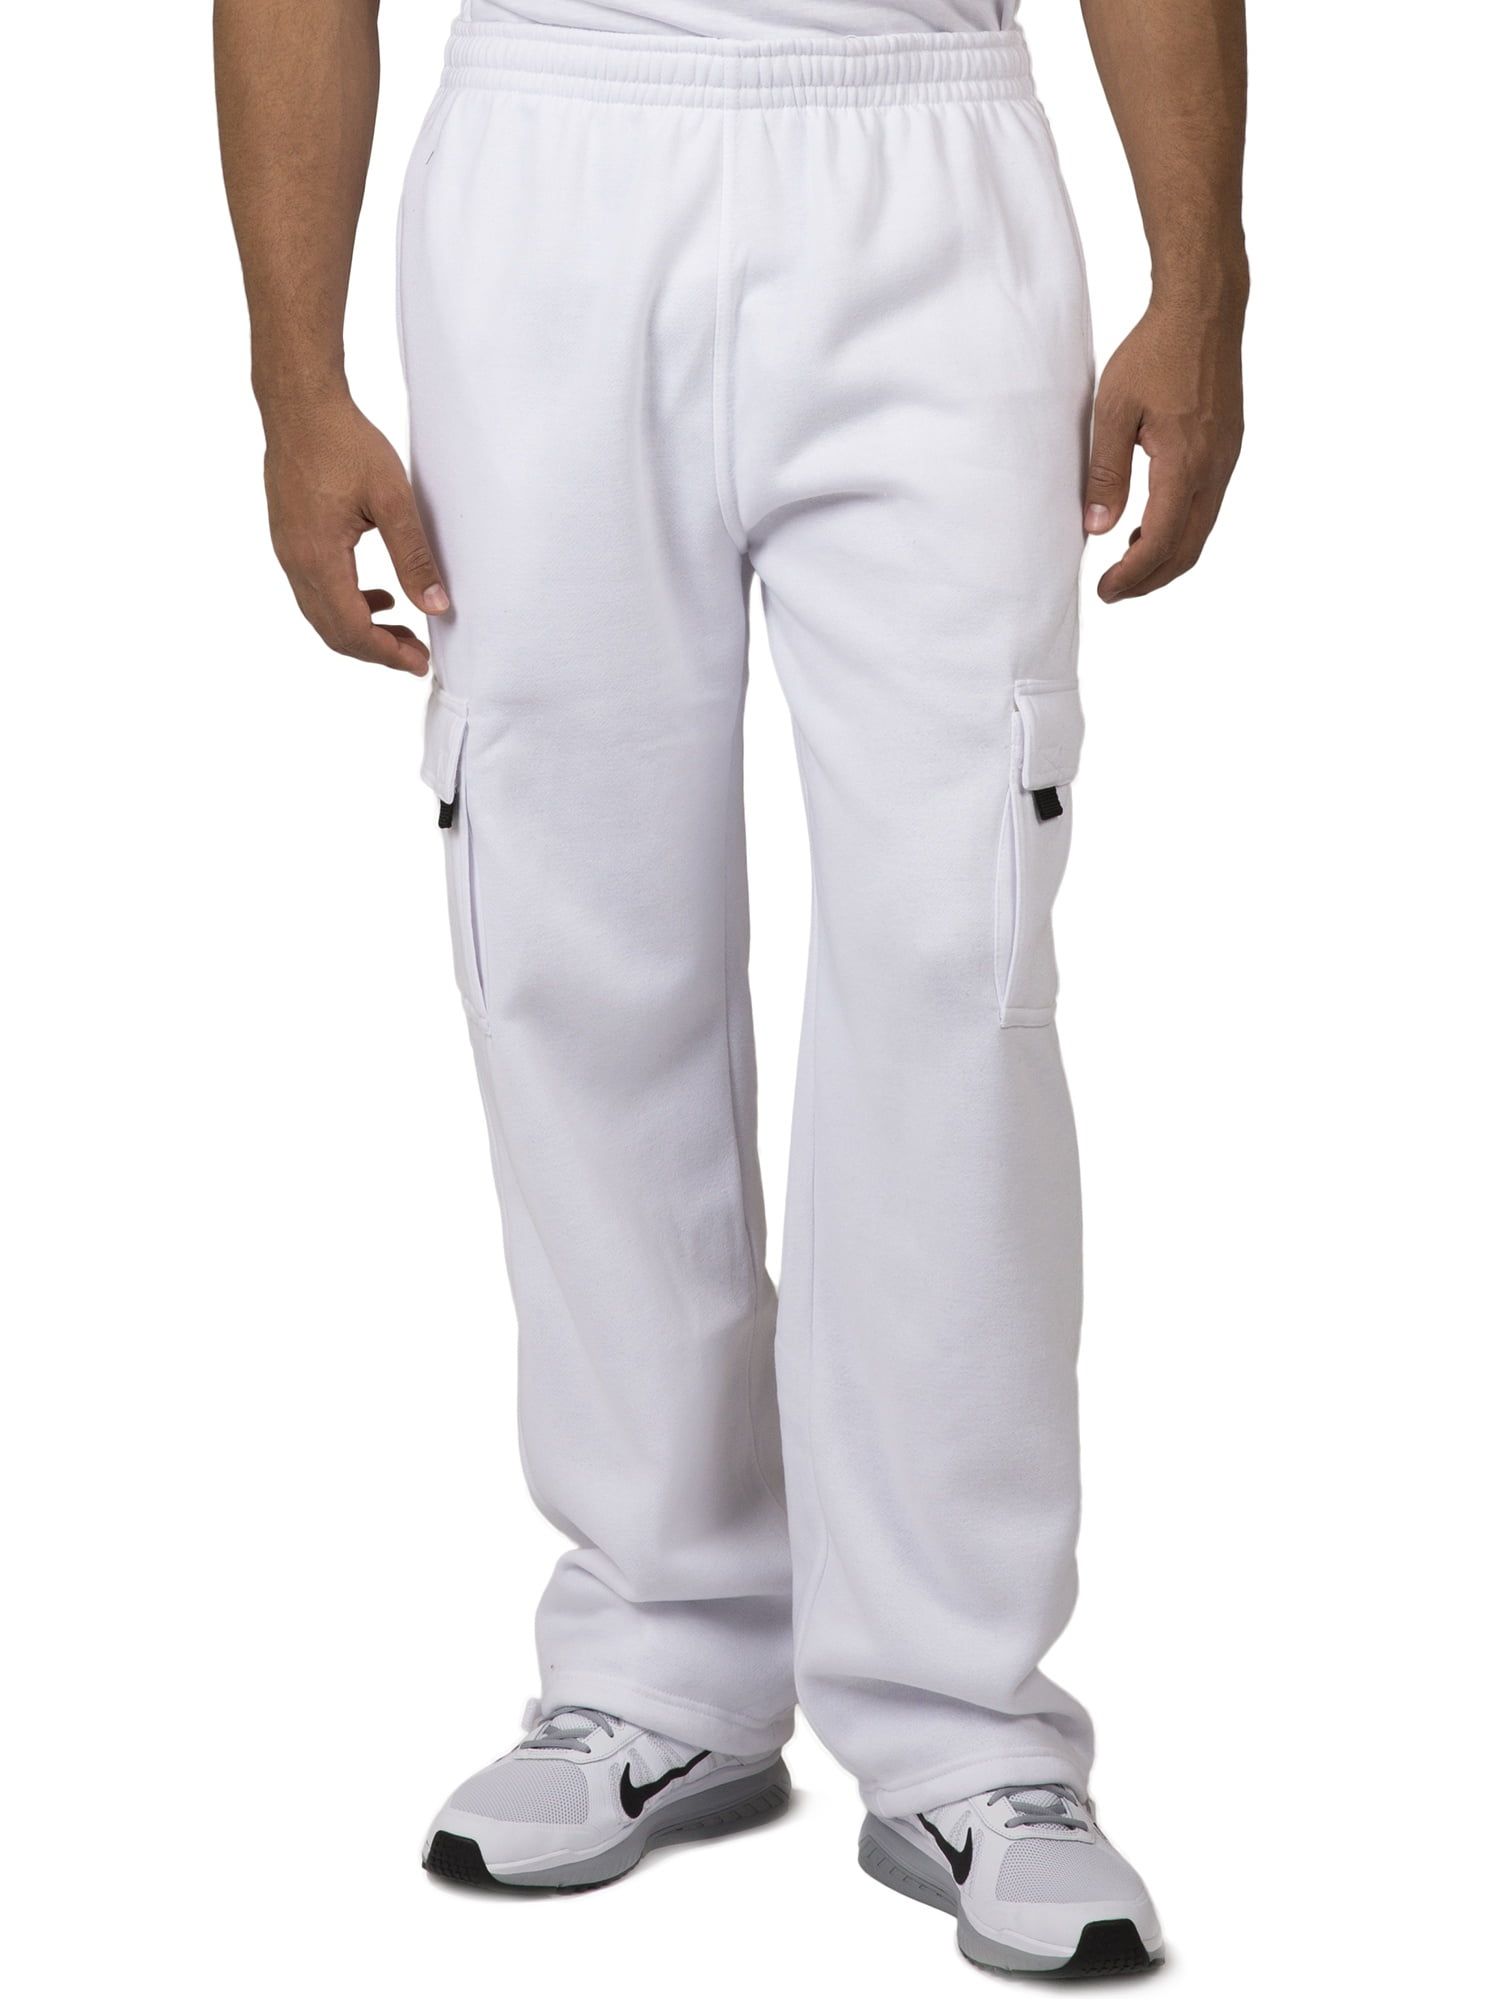 Vibes - Vibes ProActive Mens White Fleece Relax Fit Cargo Pants ...